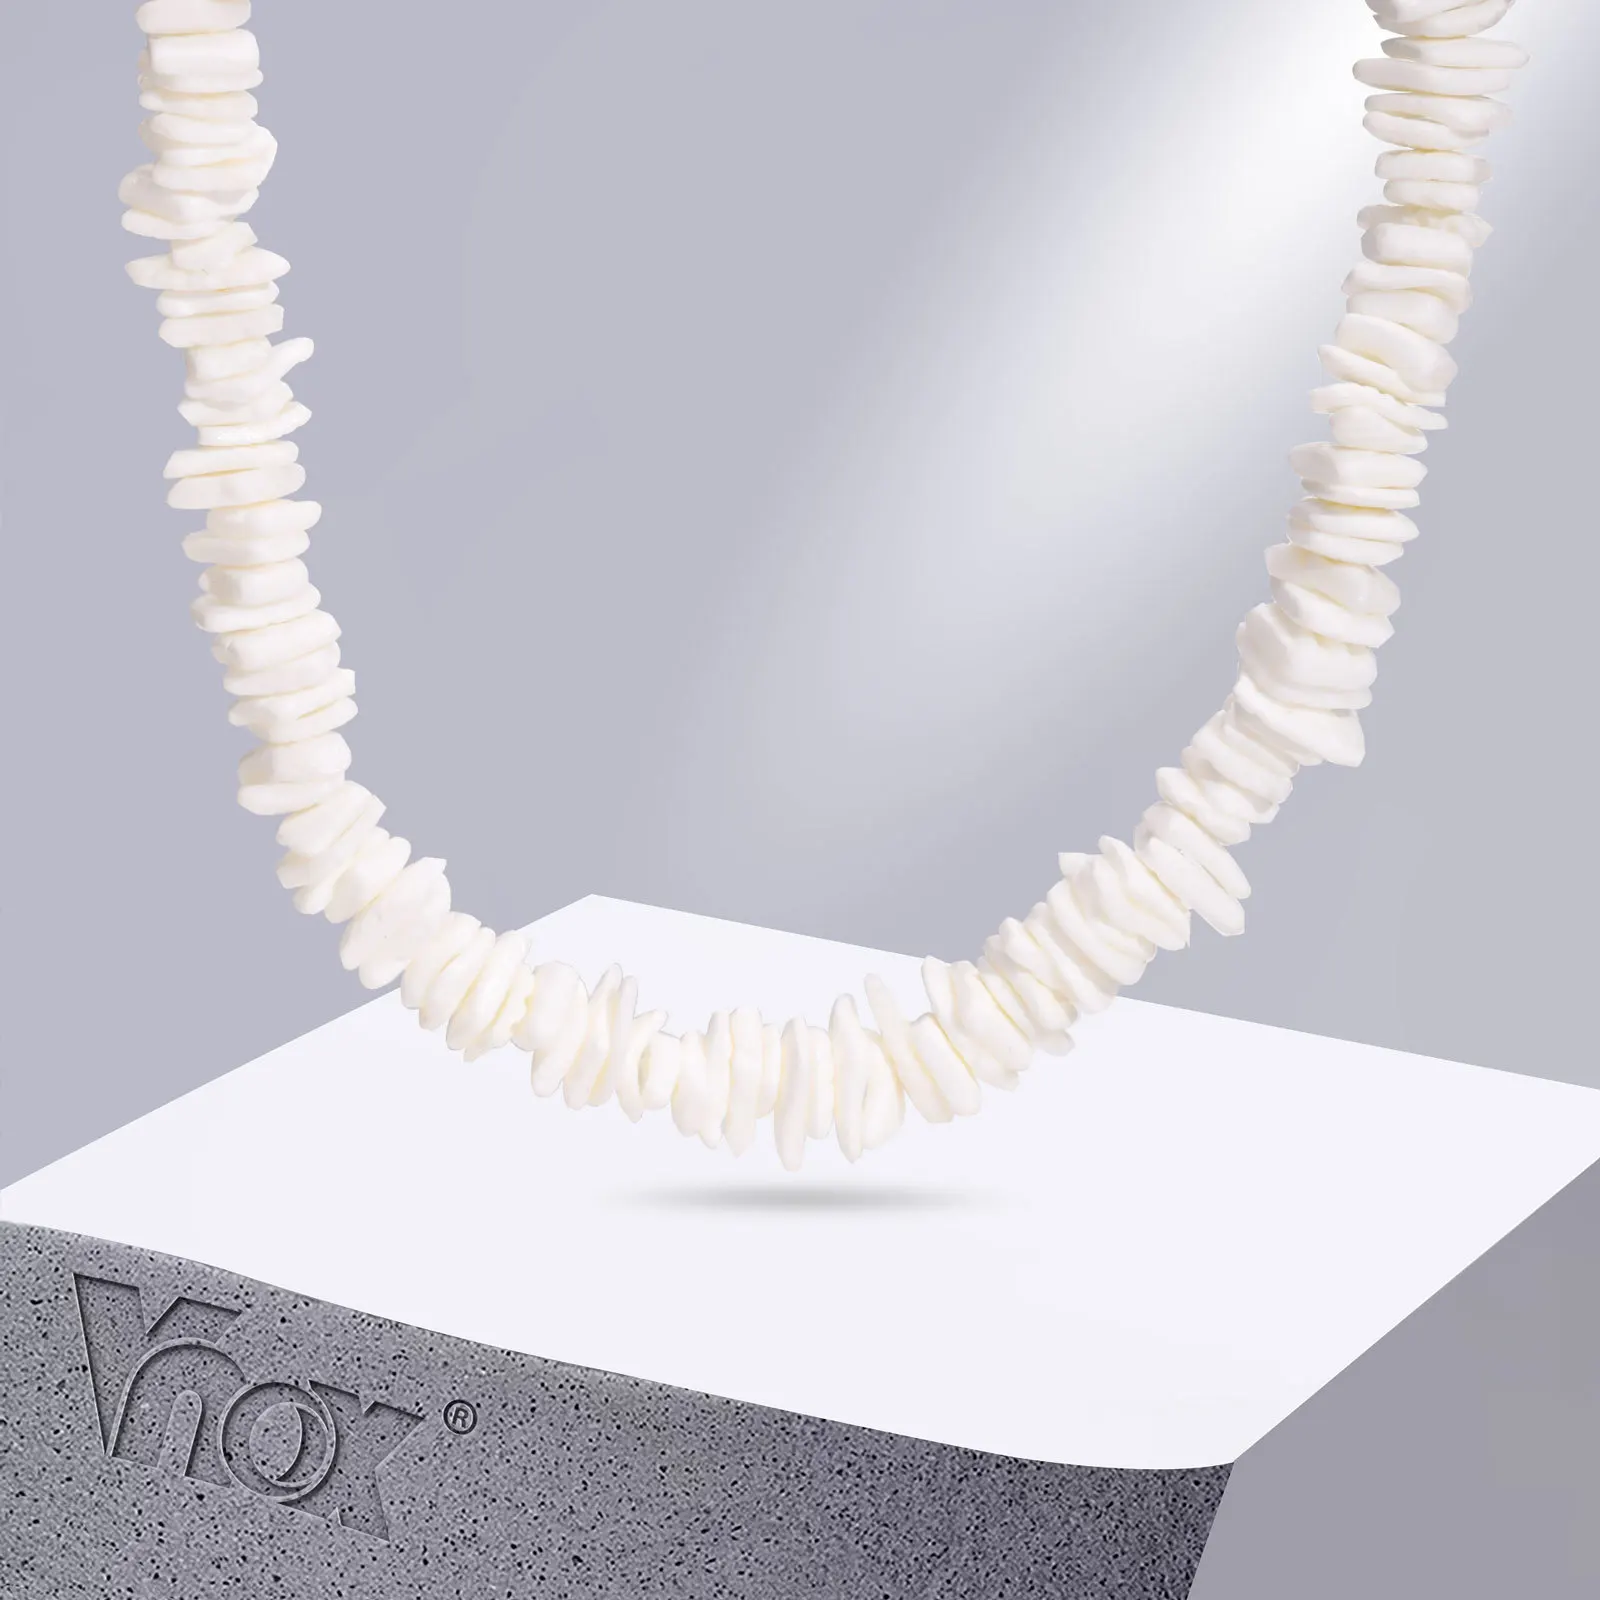 Puka Shell Necklace for Men Women - White Seashell Beach Necklaces,  Adjustable 16/18 Inches Summer Surfer Choker for Boy Girl, Cross Necklace  Jewelry Gifts : Amazon.ca: Clothing, Shoes & Accessories